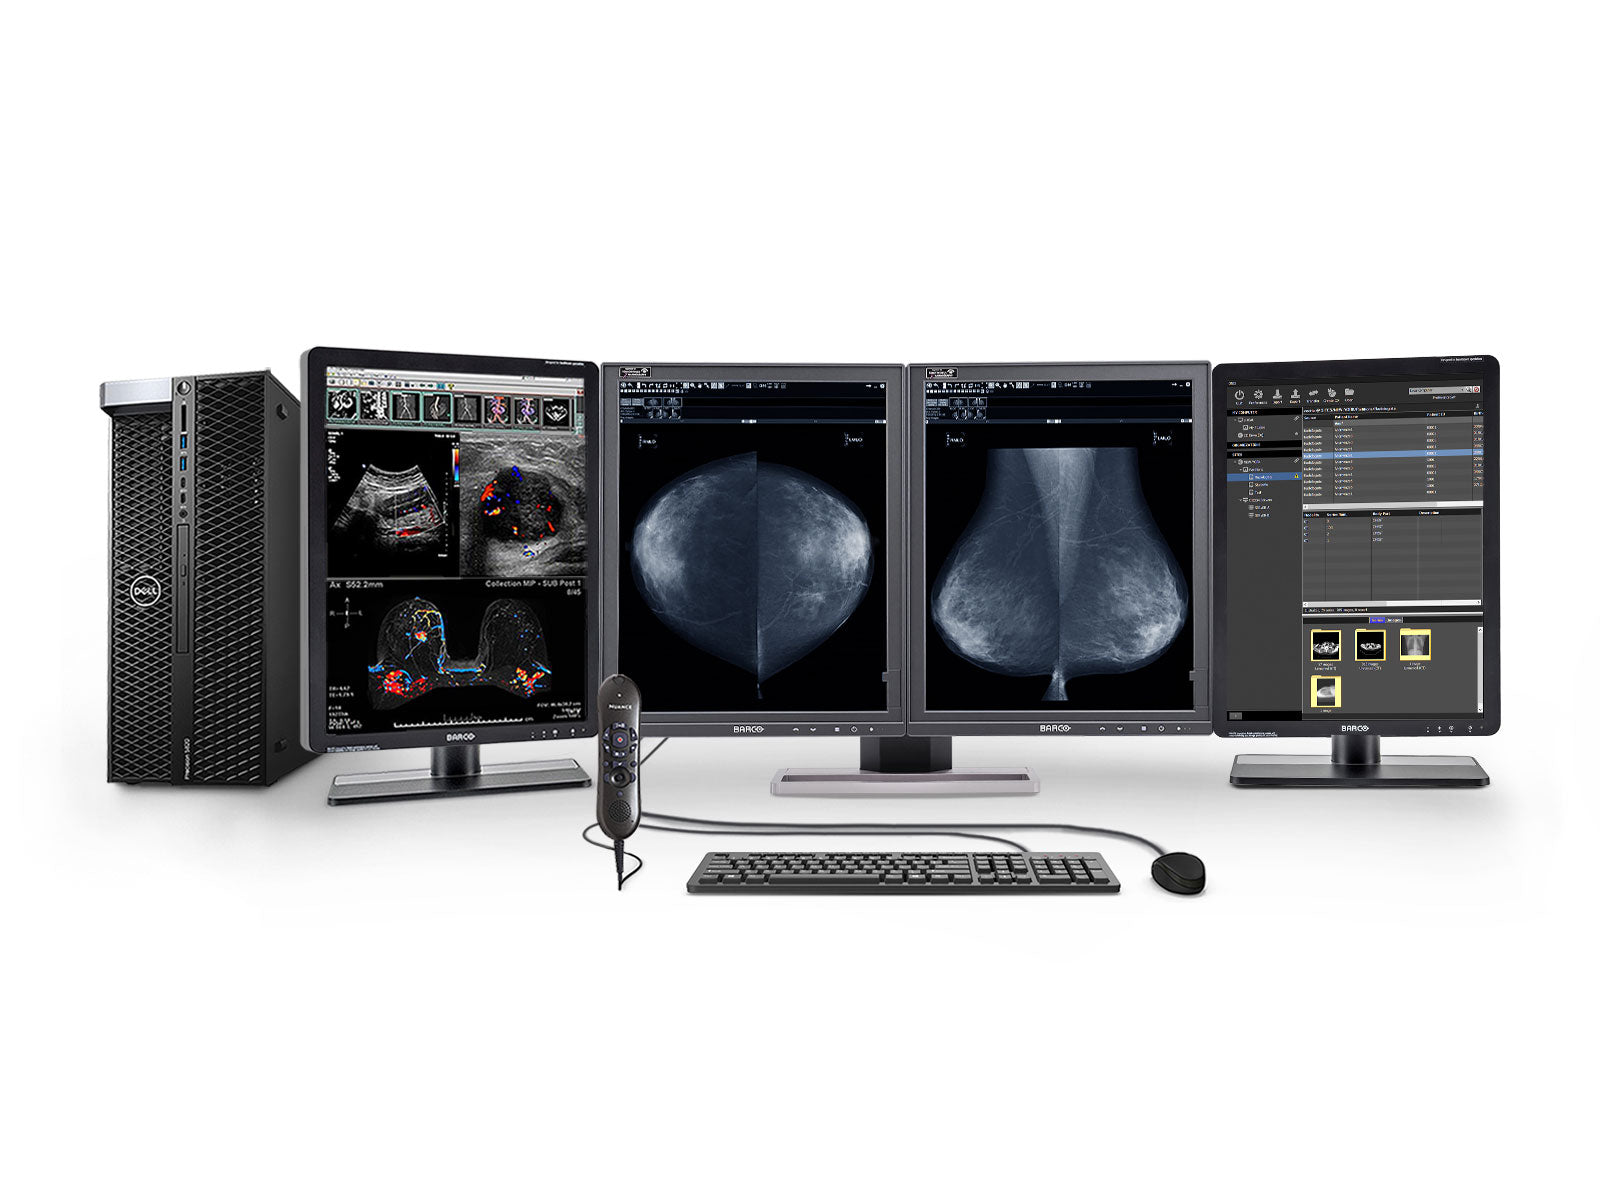 Complete Mammography Reading Station | Barco 5MP Grayscale LED Monitor | Dell Workstation | Dictation Mic | Worklist Monitors (5221Z4) Monitors.com 